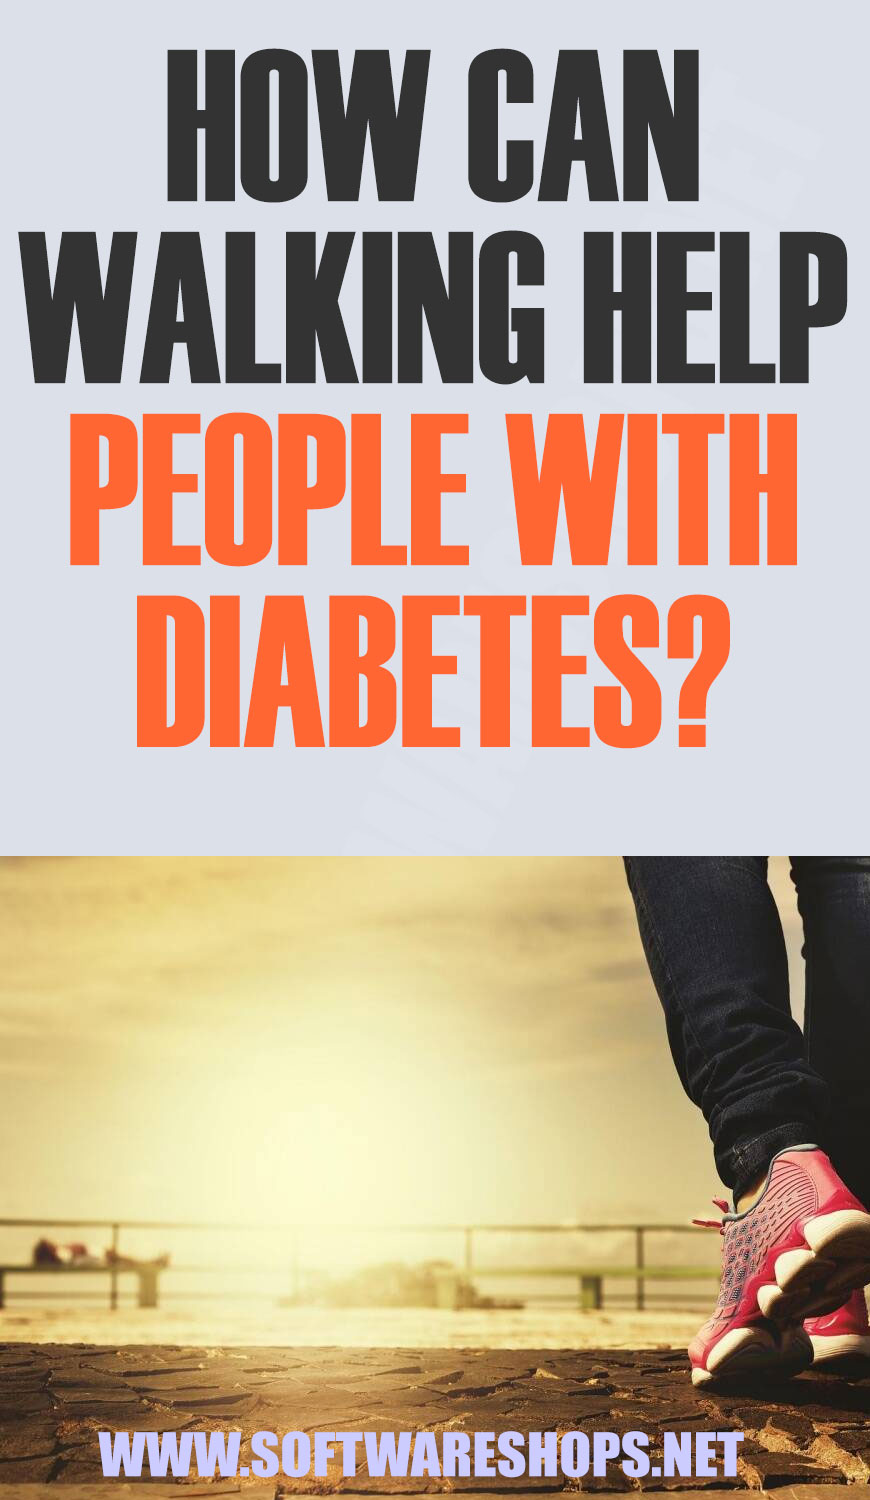 How Can Walking Help People With Diabetes